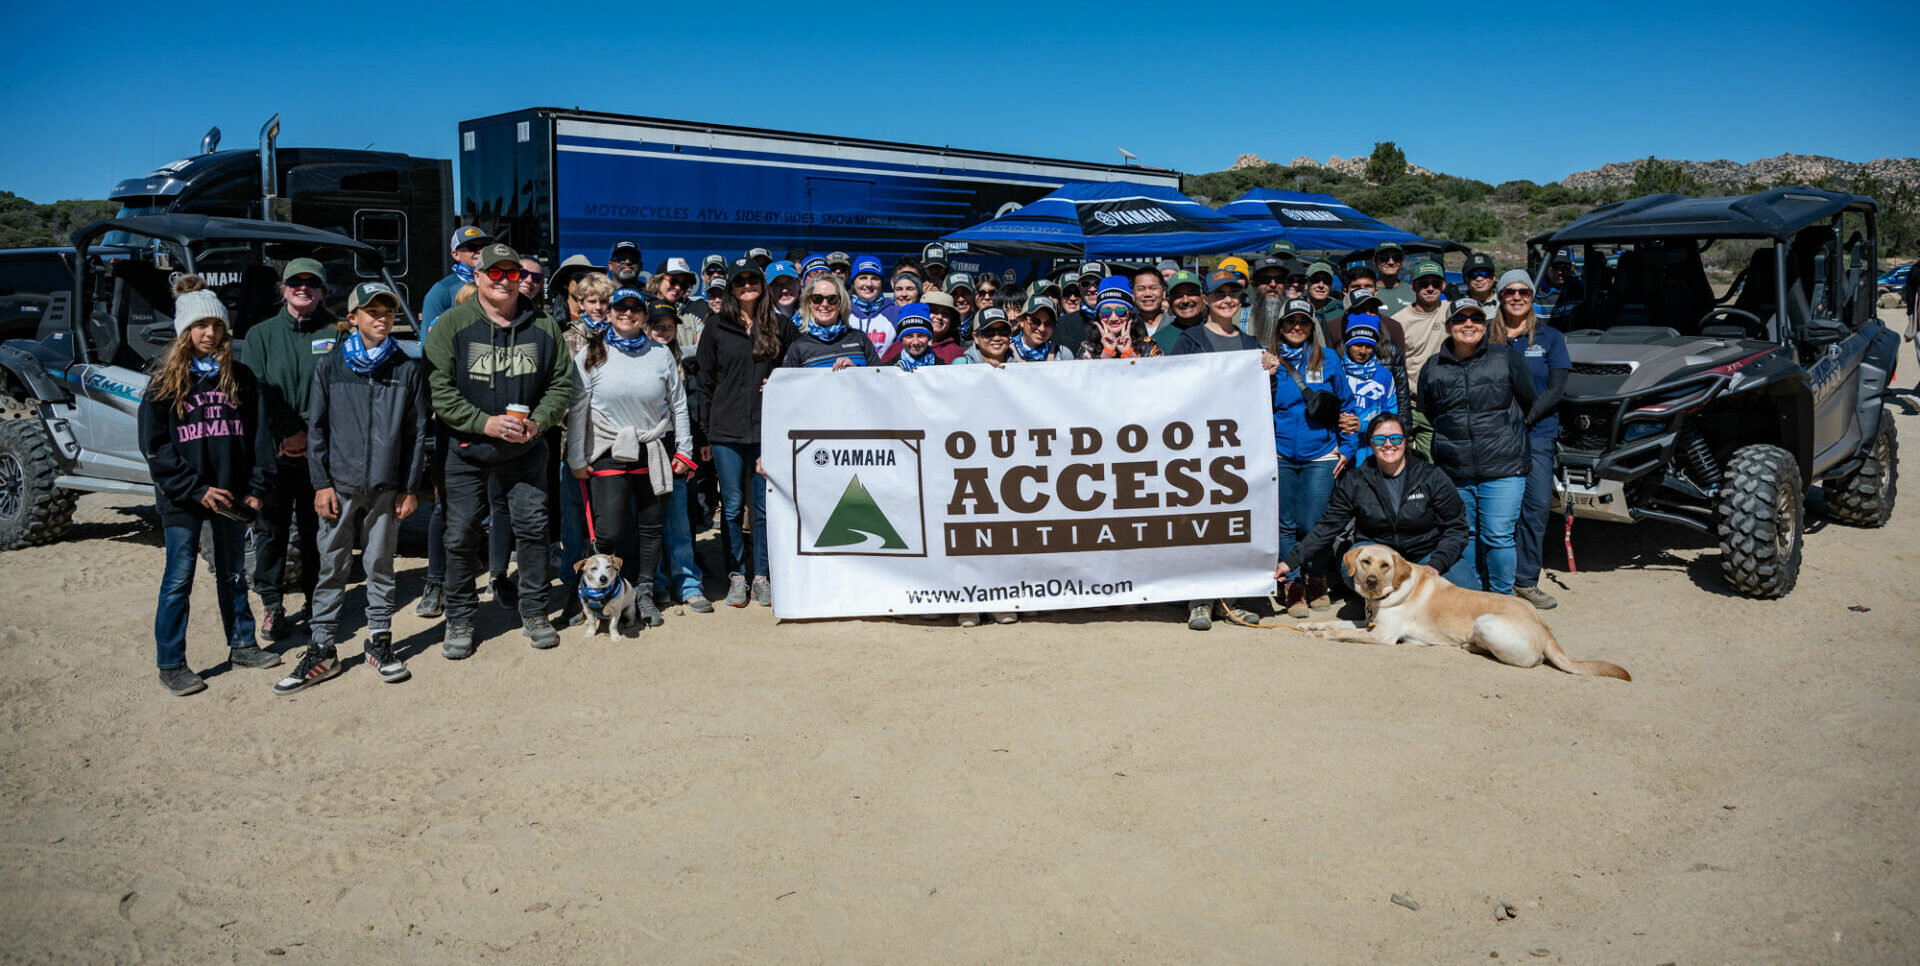 Volunteers from Yamaha Motor Corp., U.S.A. and the Southern California Mountains Foundation (SCMF) at a clean-up event at the Pinnacles OHV Staging Area in the San Bernardino National Forest, in Southern California. Photo courtesy Yamaha Motor Corp., U.S.A.